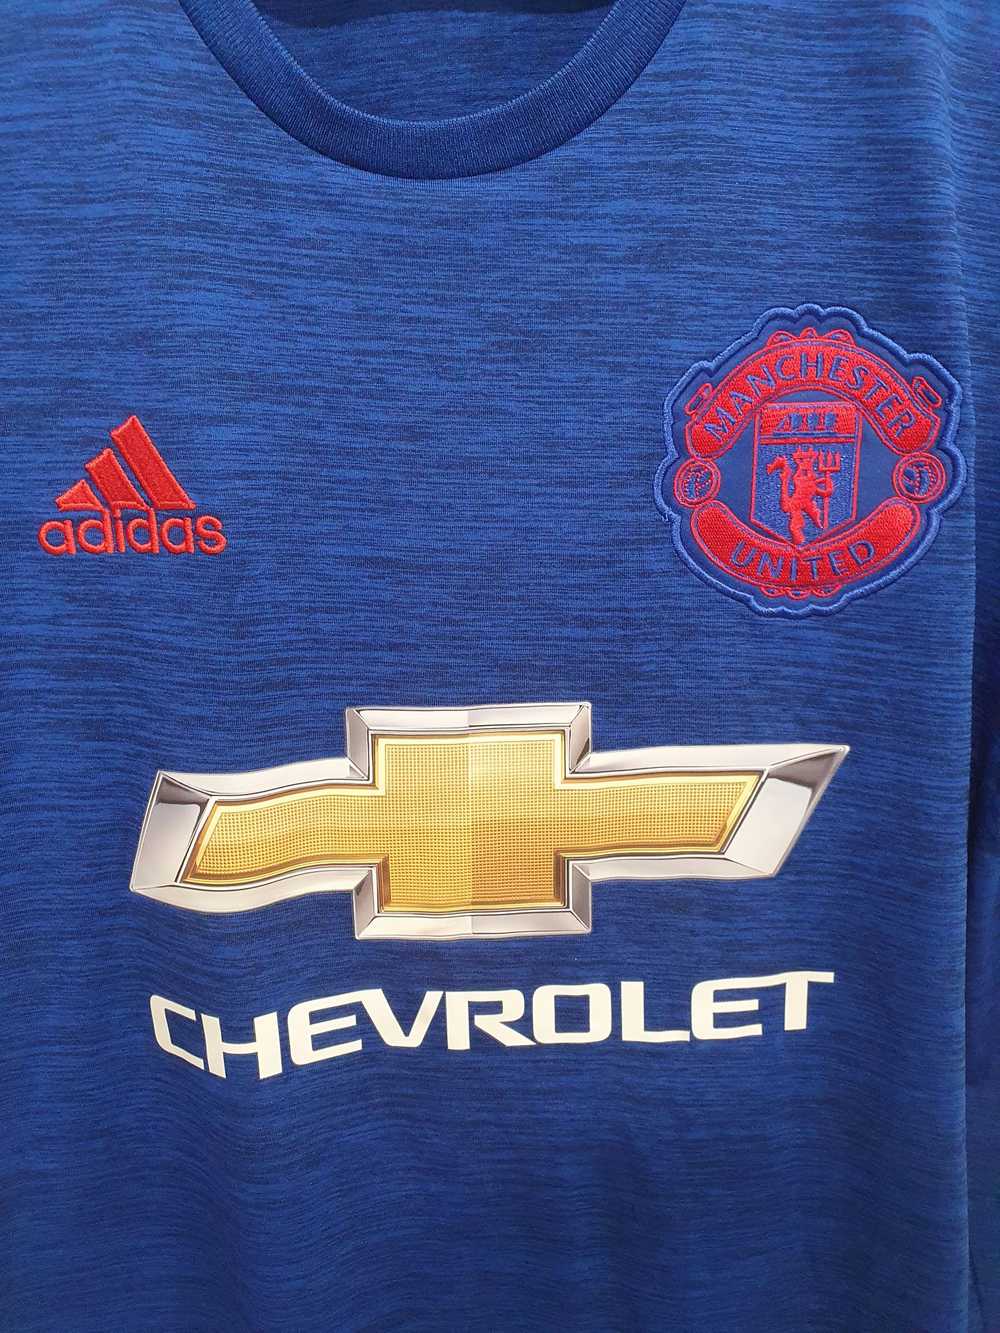 Jersey × Manchester United × Soccer Jersey ADIDAS… - image 5